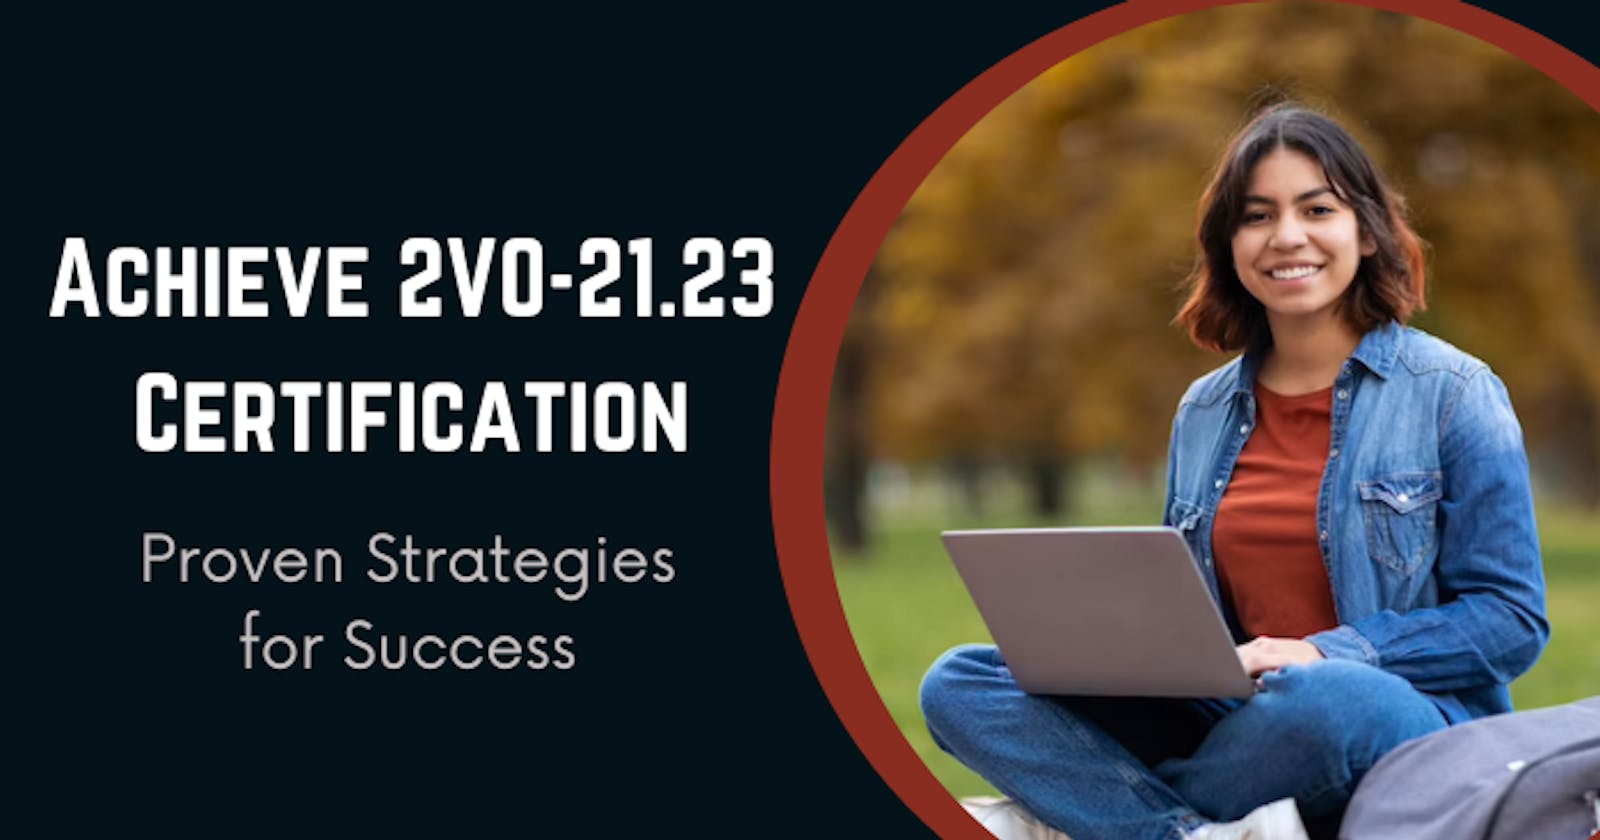 Are You Getting Ready for the 2V0-21.23 Certification in 2023?